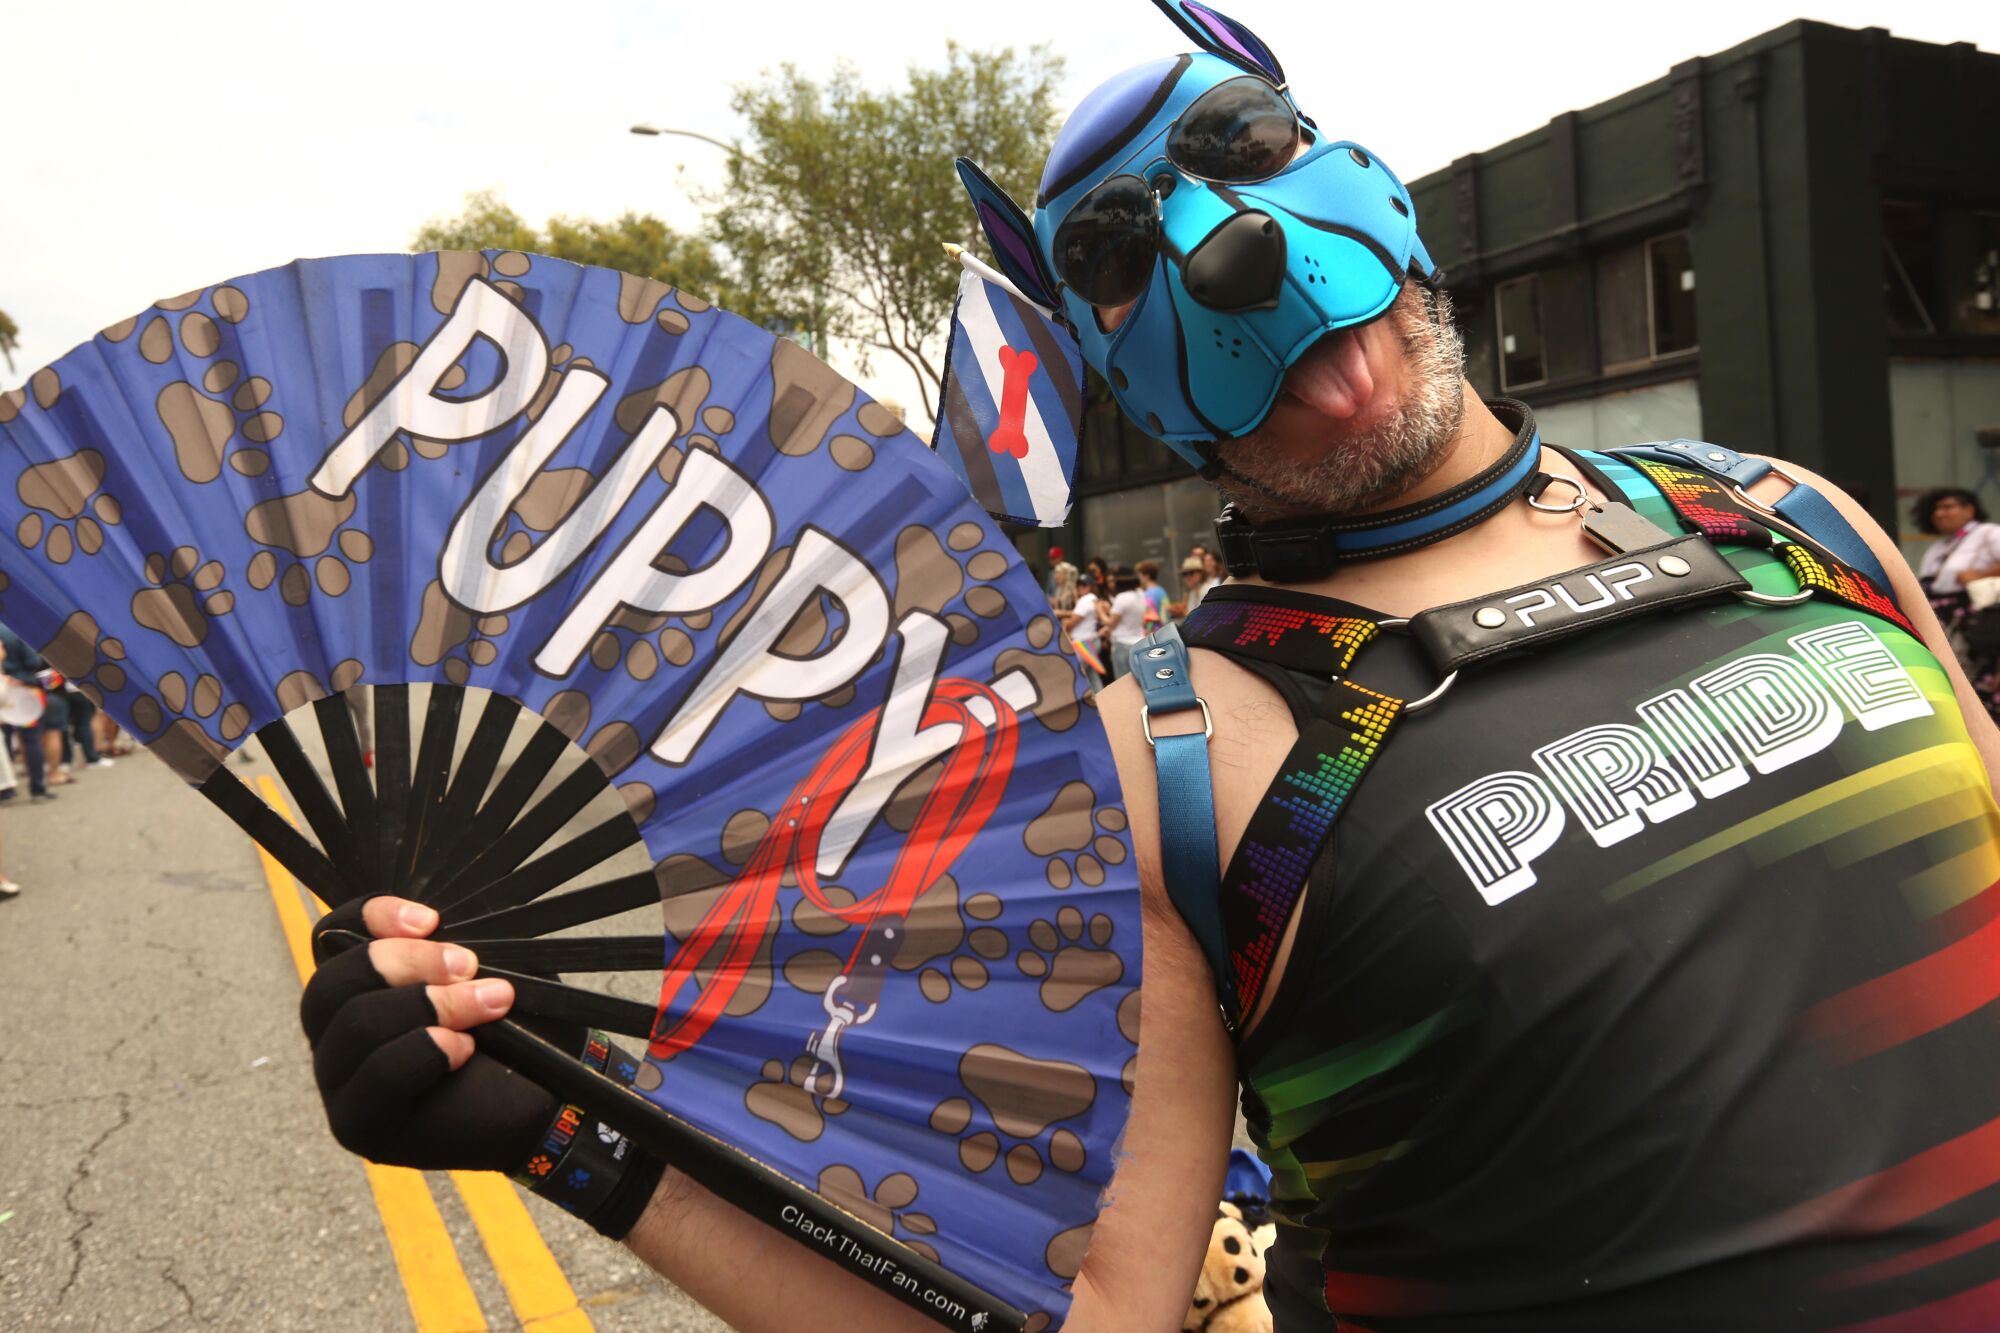 A man spreads a fan that says "puppy" with a leash and wears a leather mask.